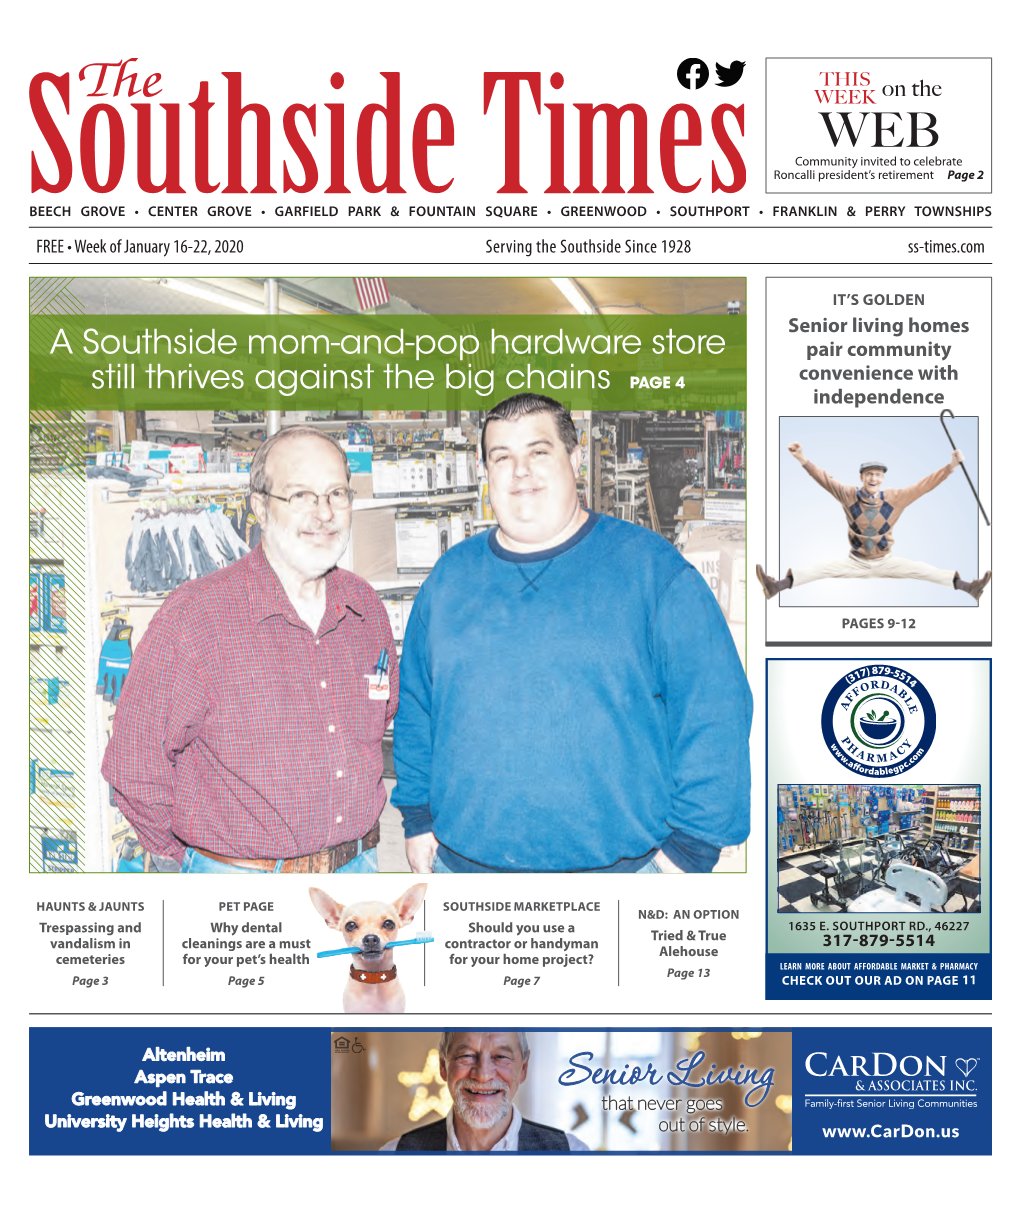 Senior Living Homes a Southside Mom-And-Pop Hardware Store Pair Community Convenience with Still Thrives Against the Big Chains PAGE 4 Independence